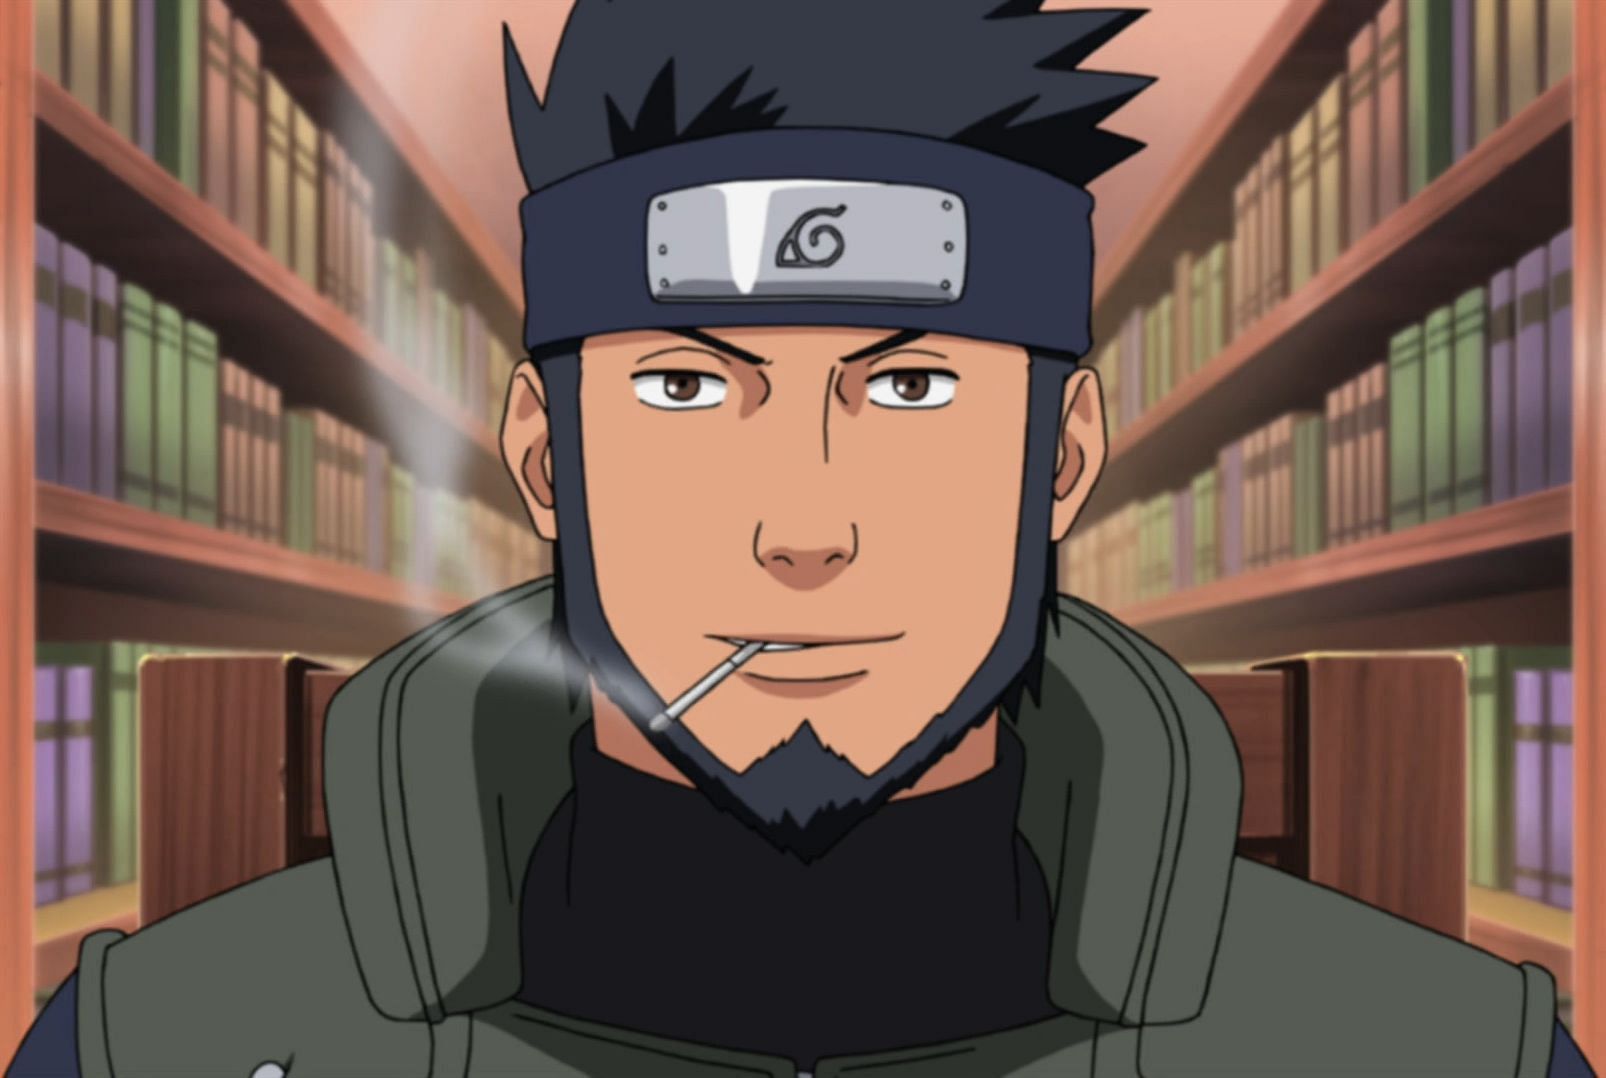 Asuma as he appears prior to his death in Naruto Shippuden (Image via Studio Pierrot)